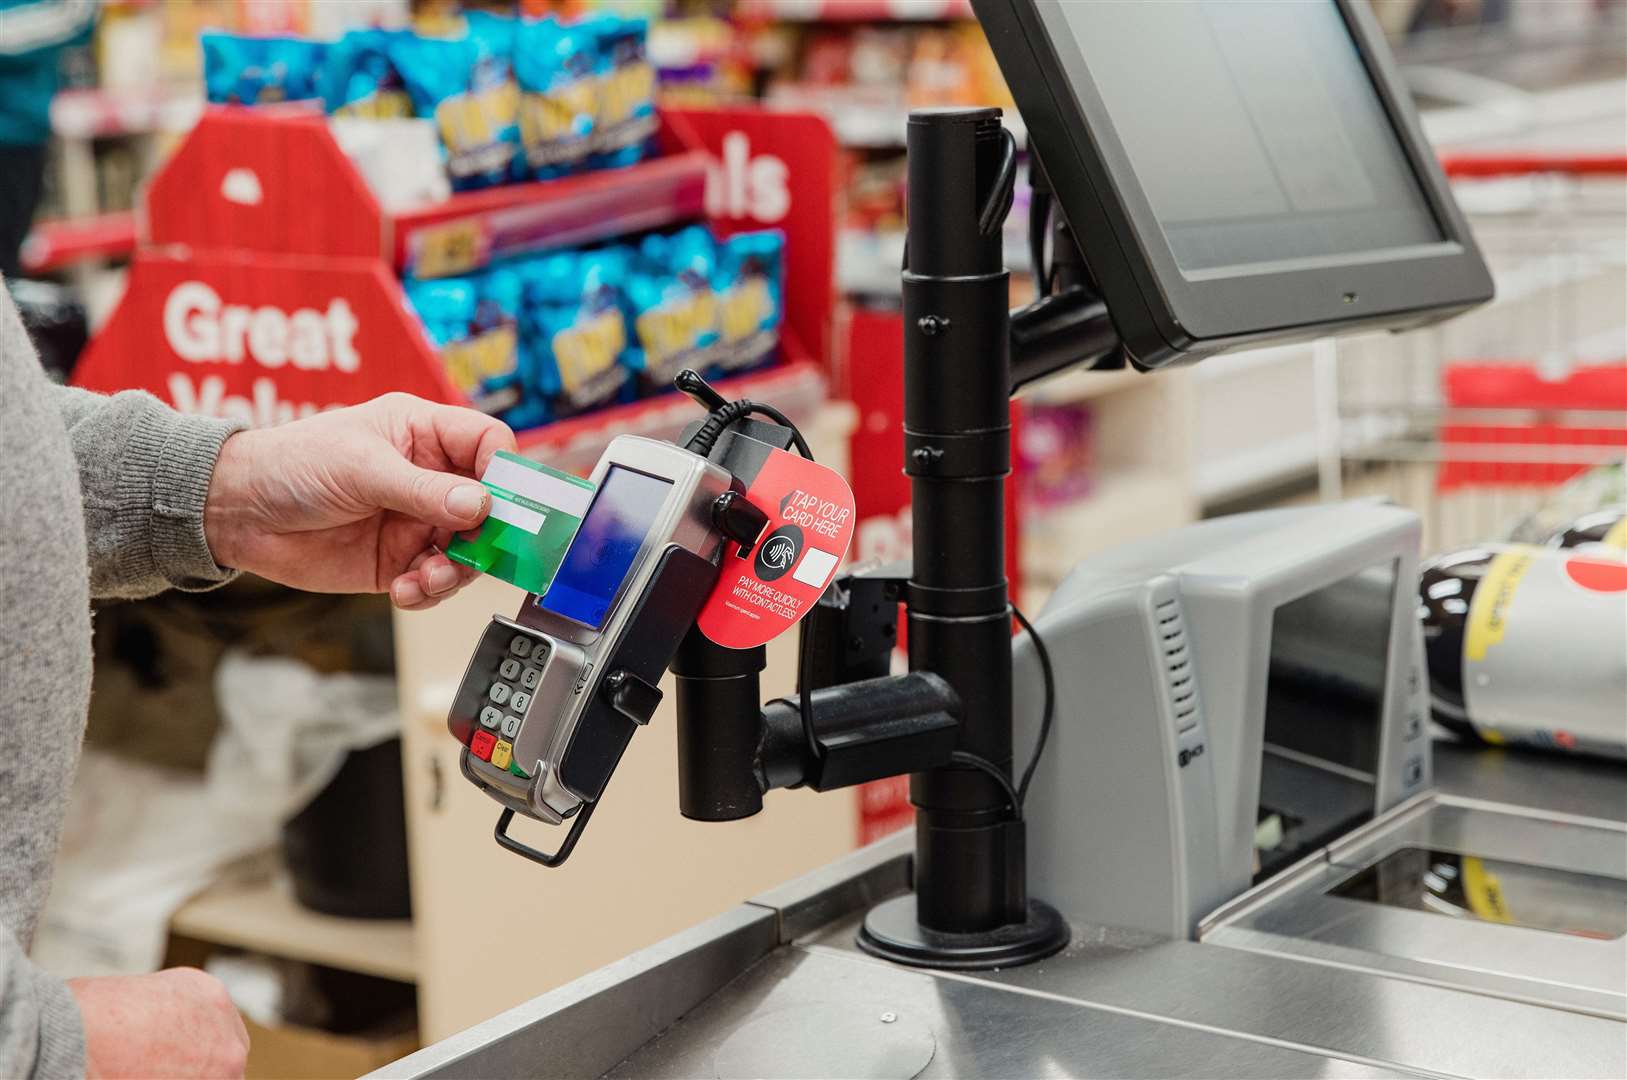 Loyalty cards can get shoppers cheaper prices at the tills. Image: iStock.